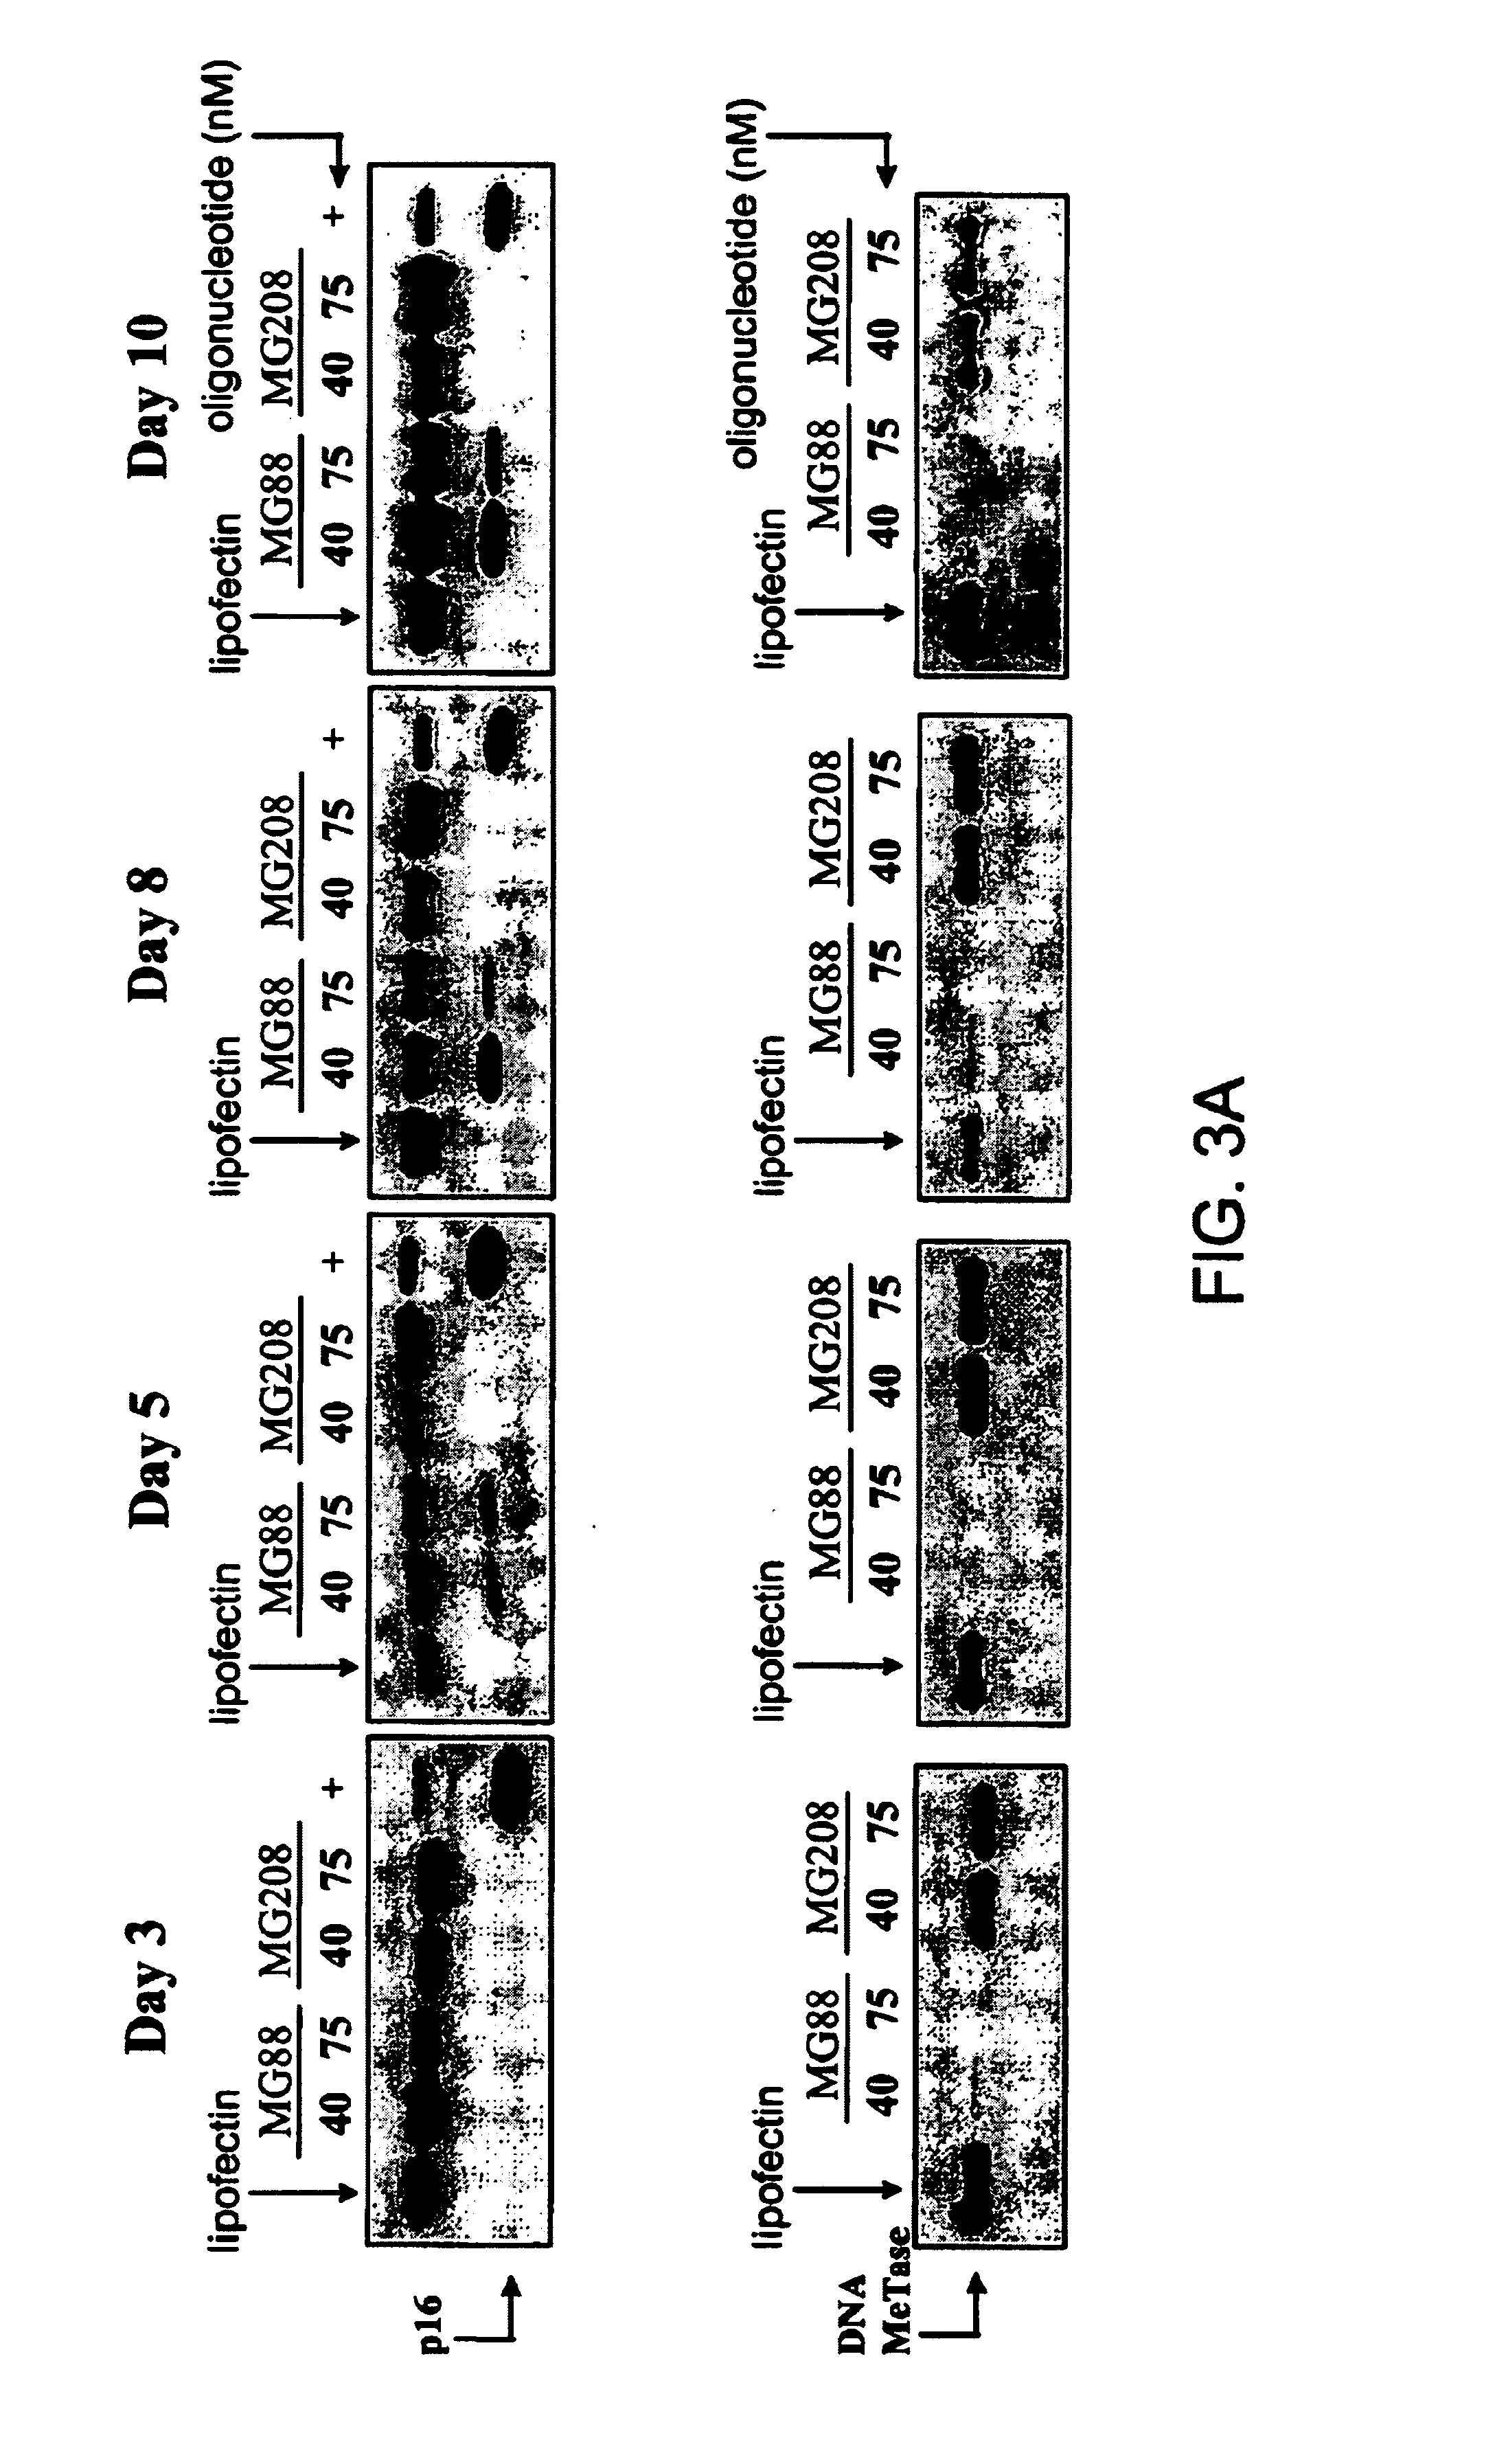 Modulation of gene expression by combination therapy